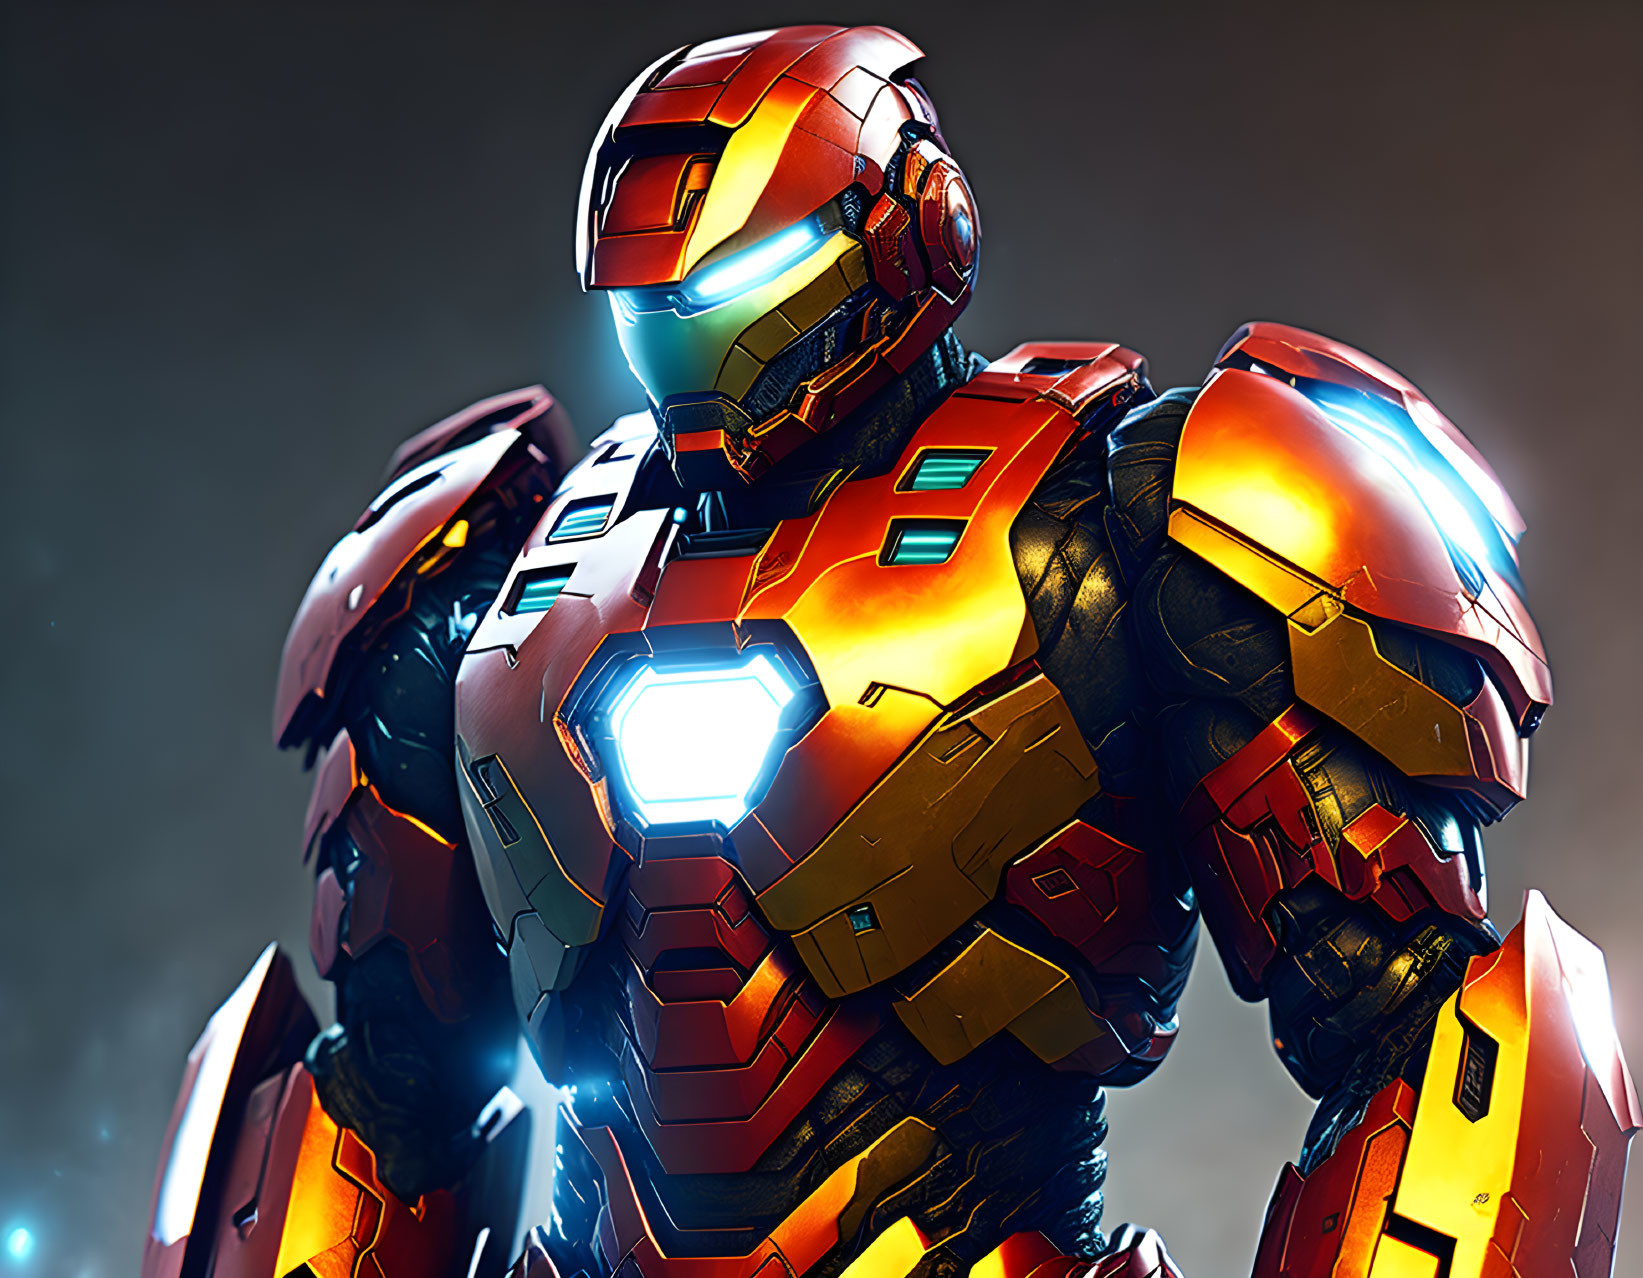 Iron Man Amour inspired by Spartan Armor from Halo